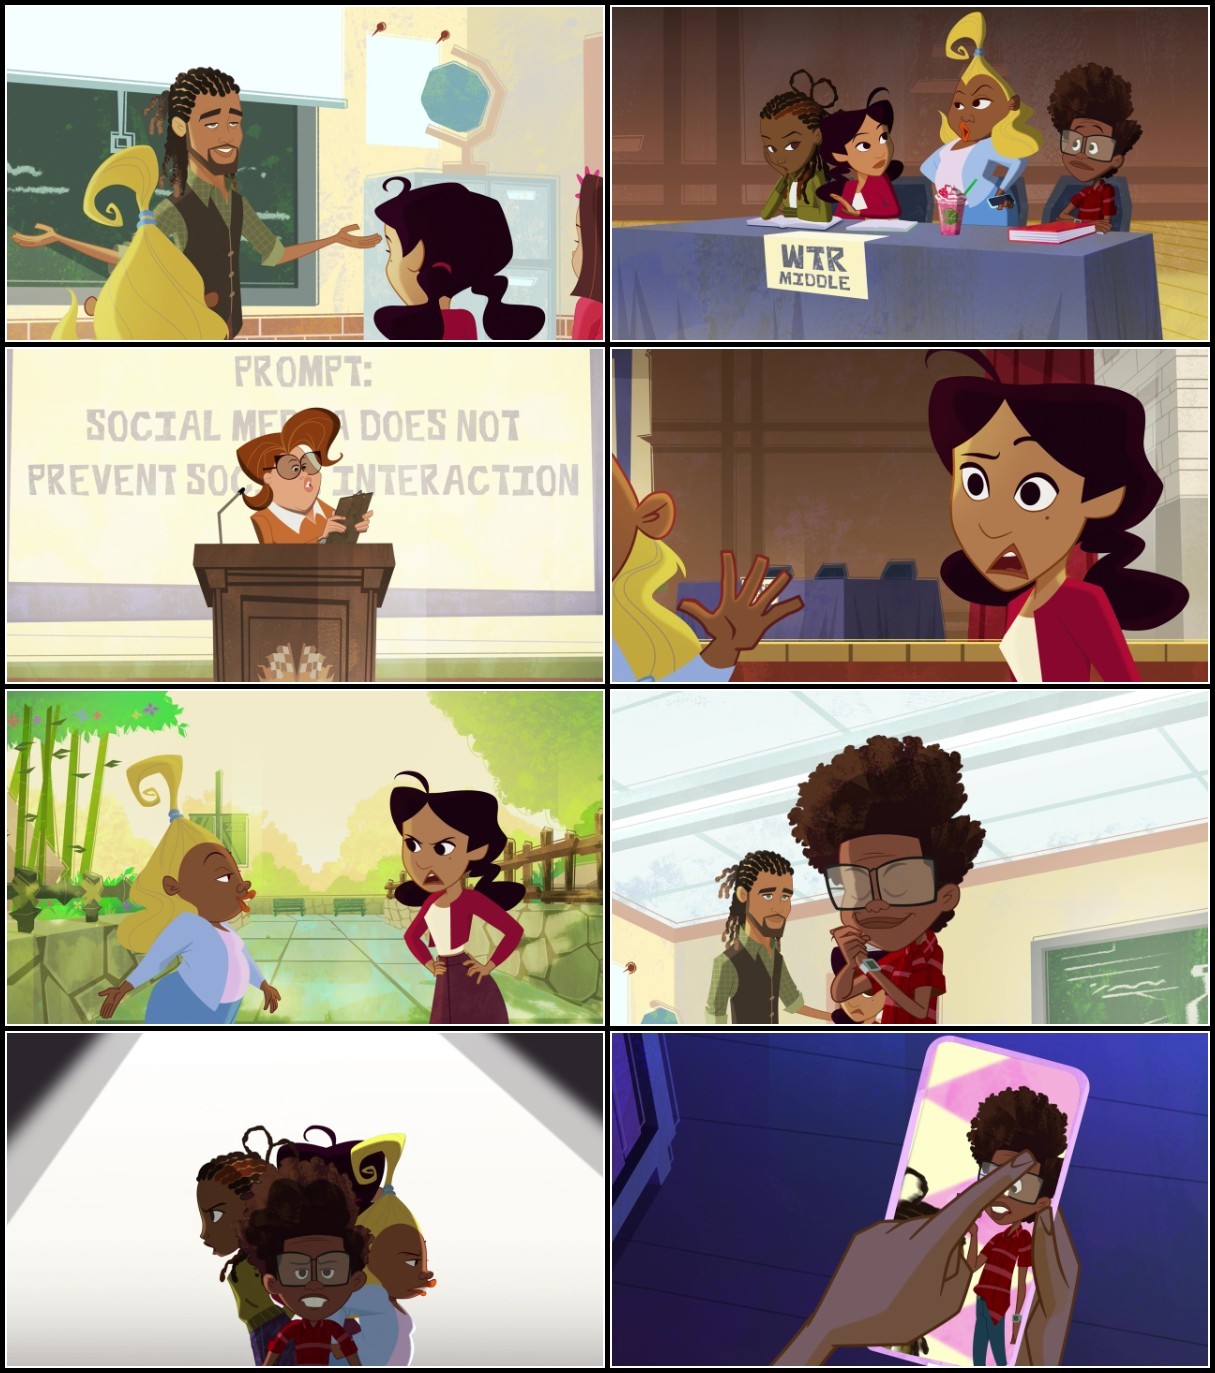 The Proud Family Louder and Prouder S02E03 720p WEB h264-KOGi